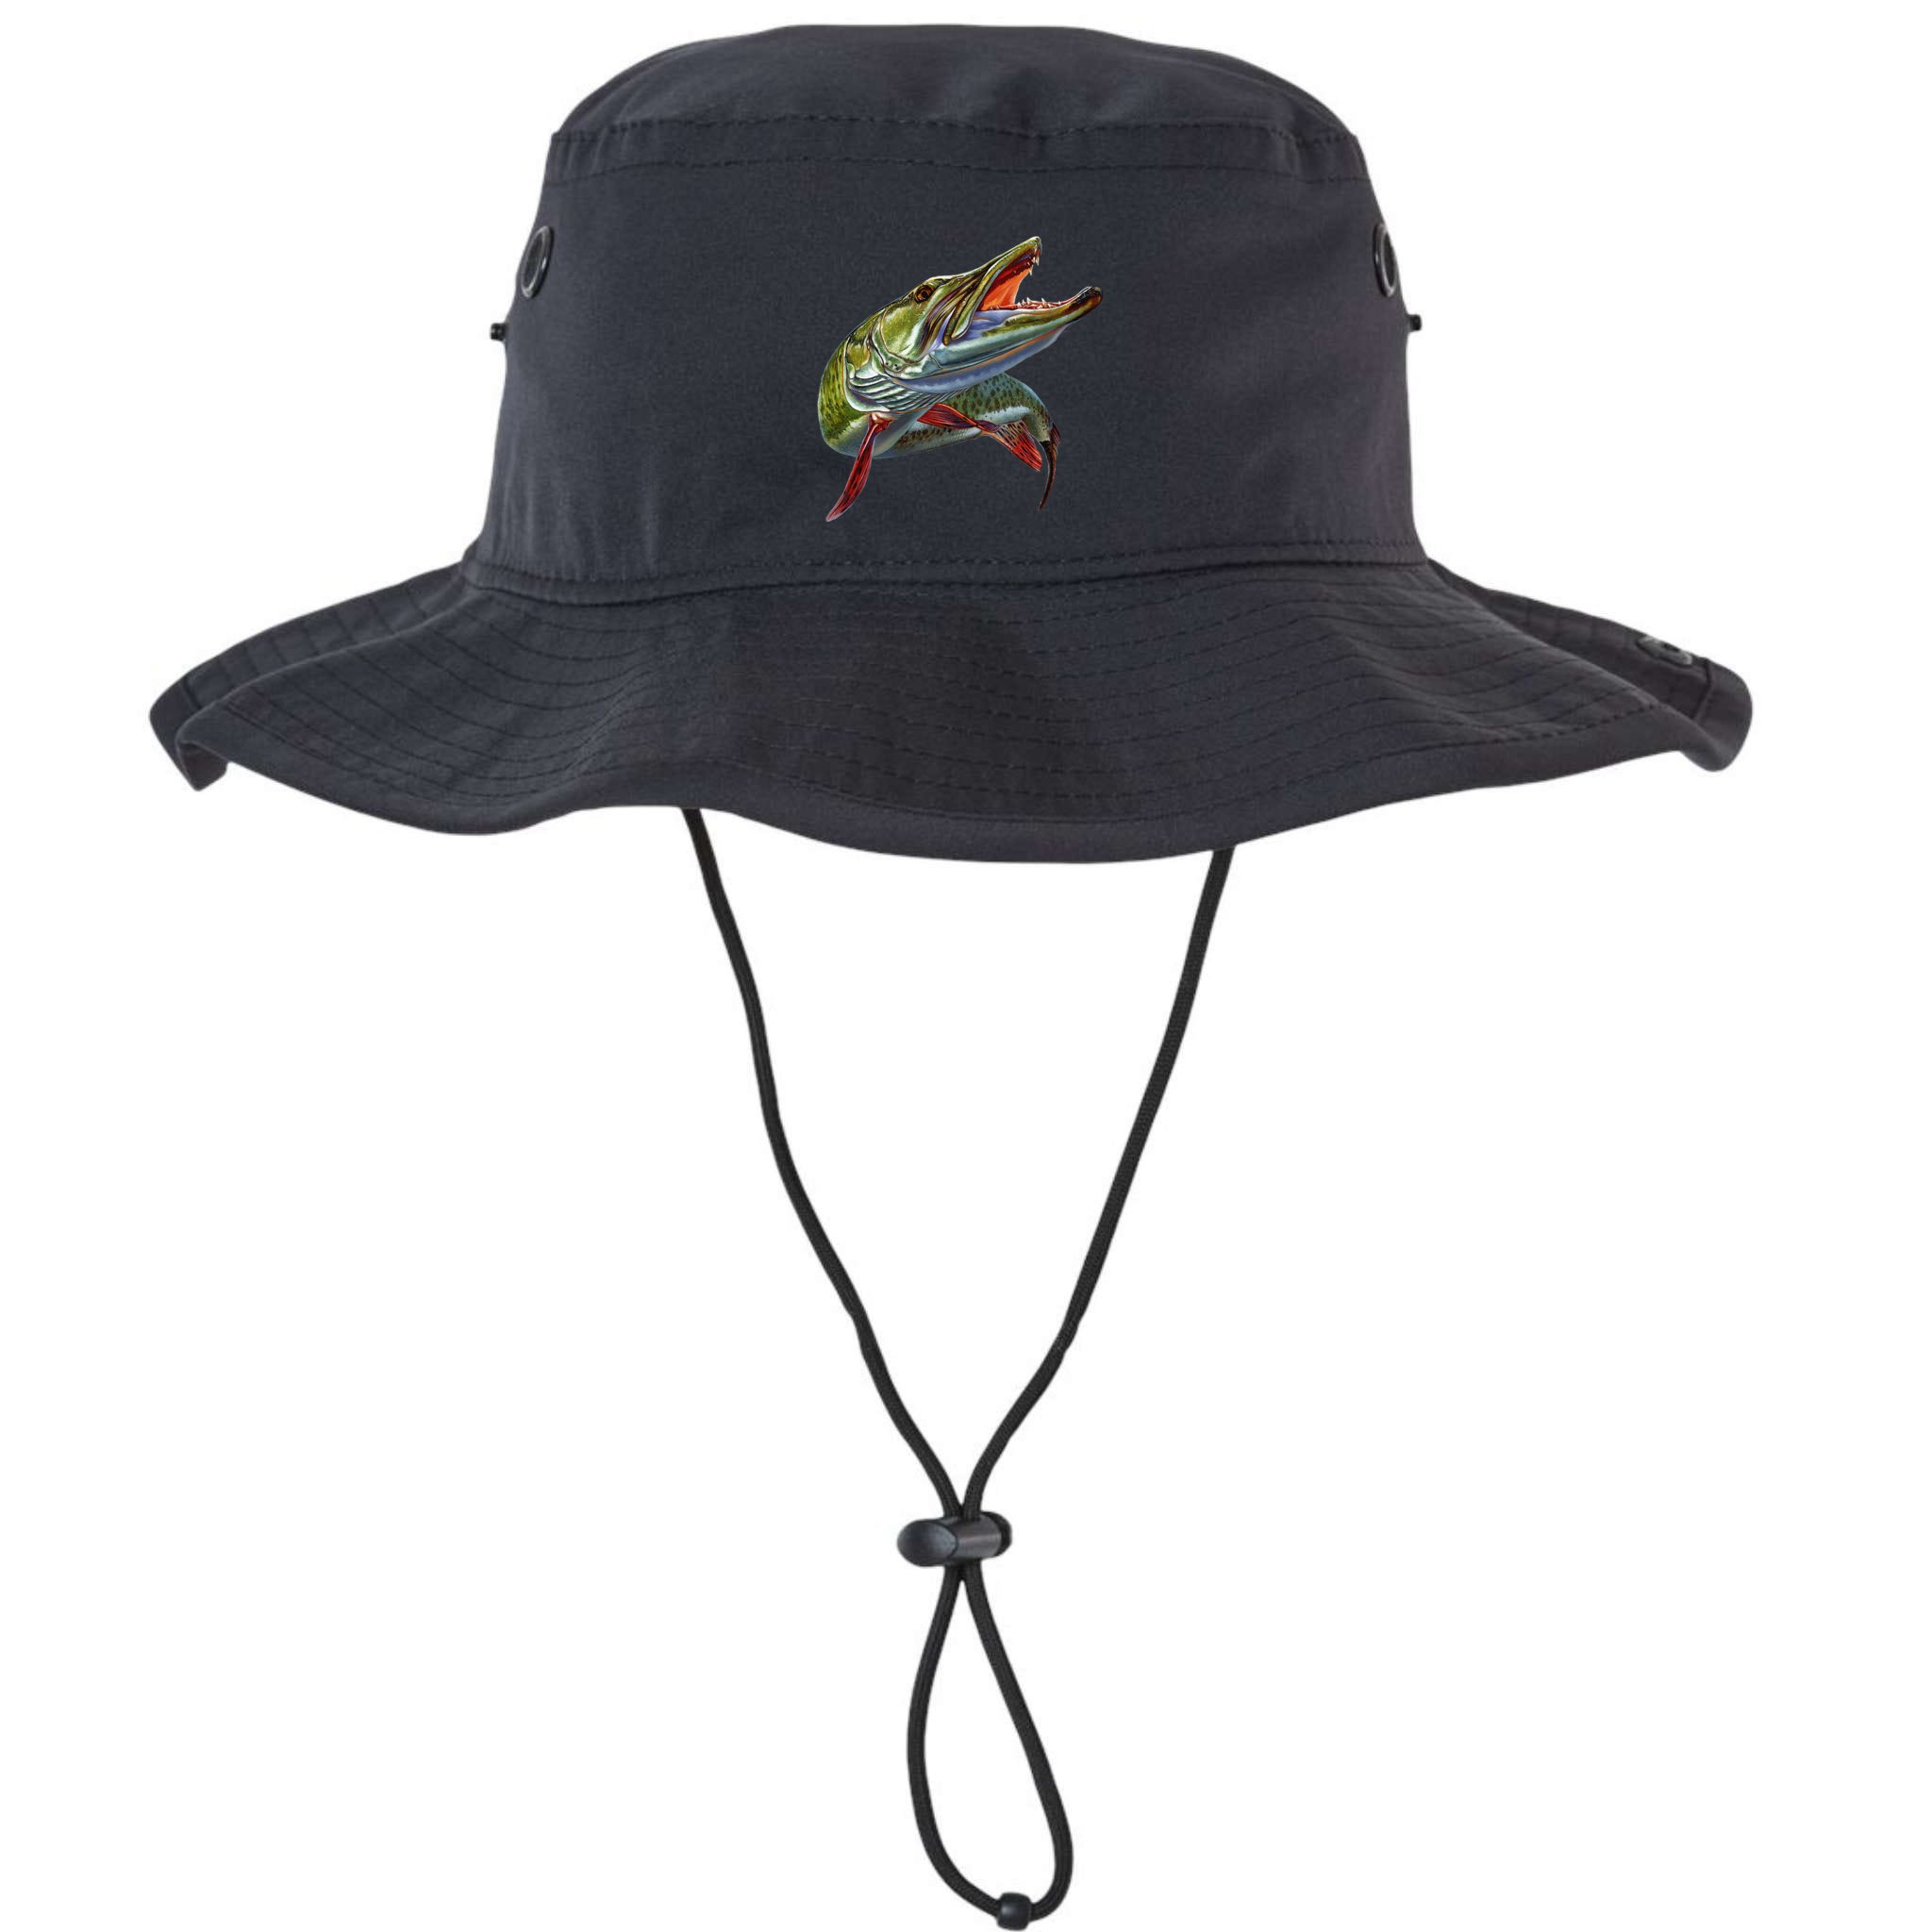 Muskie Hunter Musky Fisherman Lure Fly Fishing Novelty Gifts Legacy Cool Fit Booney Bucket Hat